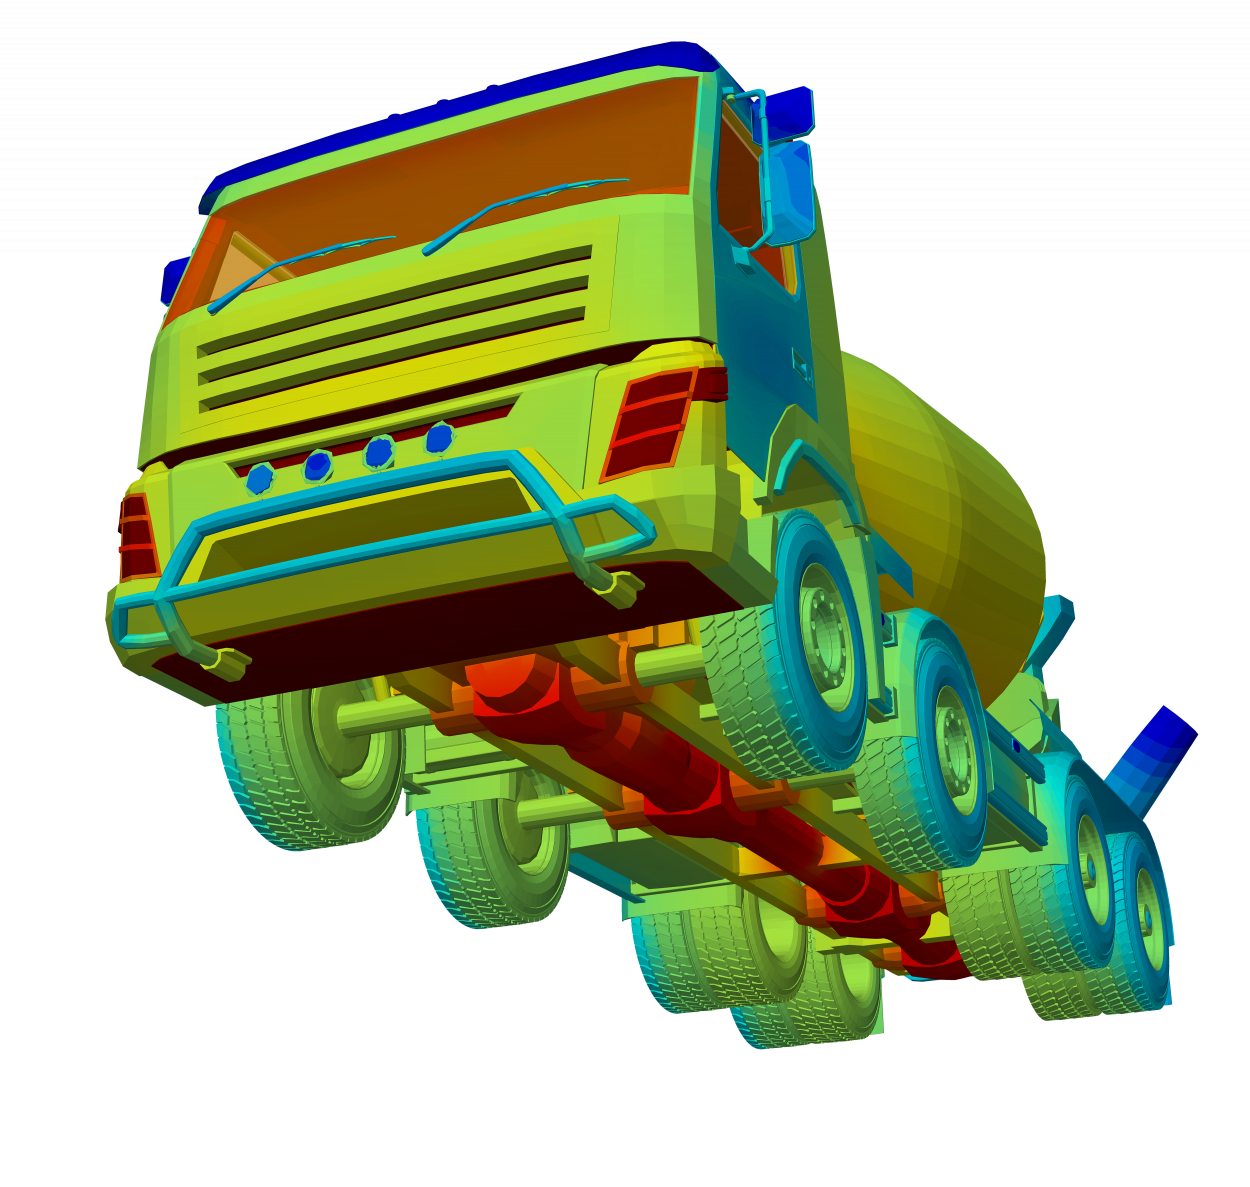 thermal simulation model of cement truck with underbody